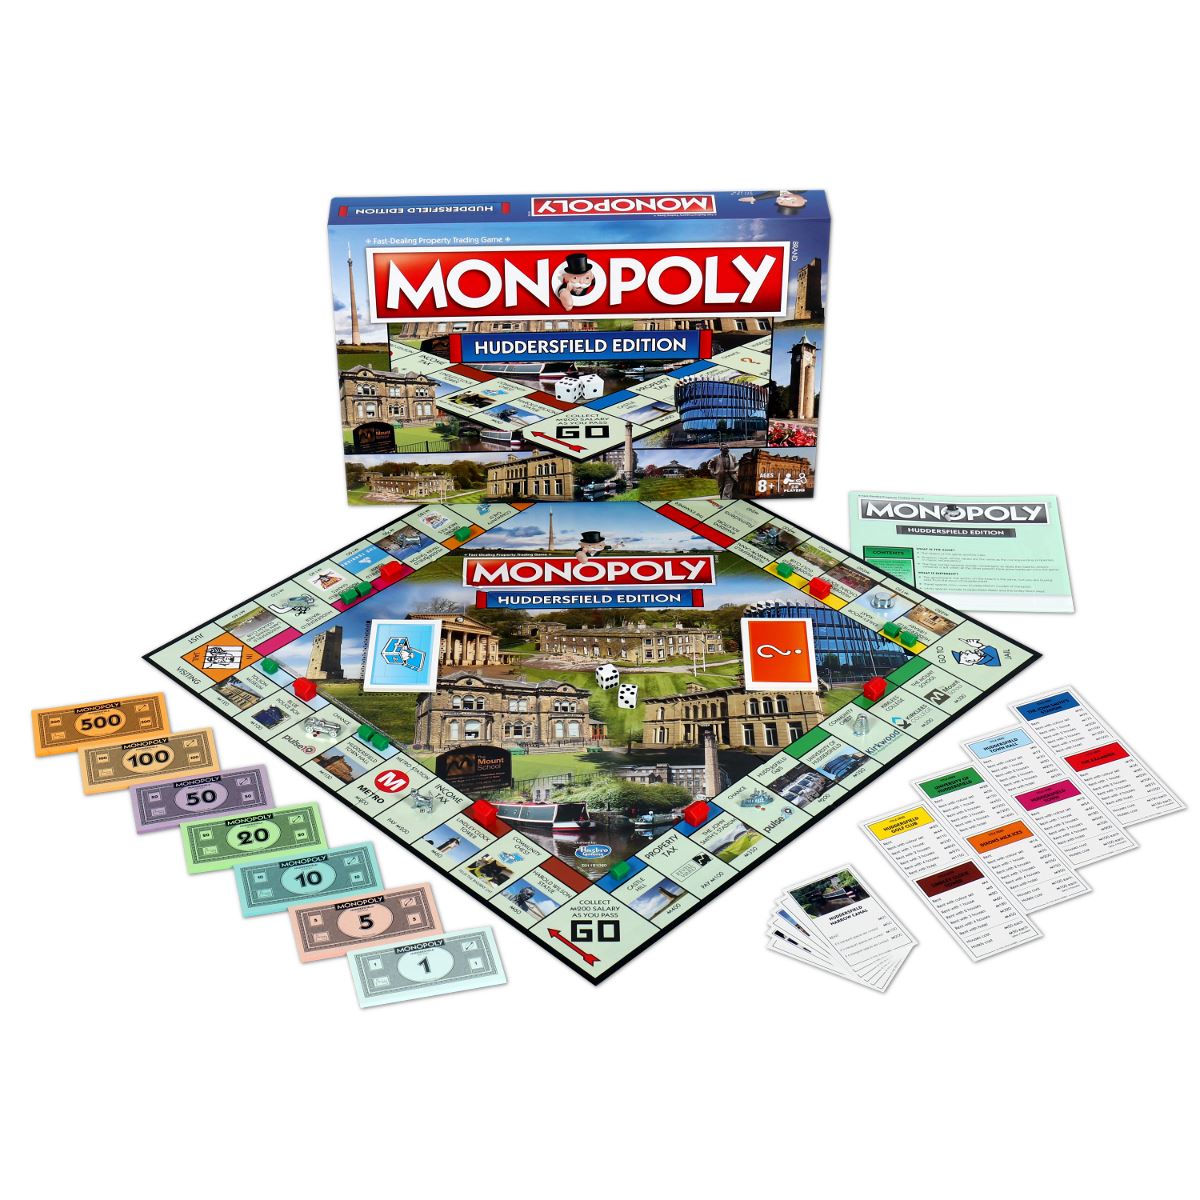 Monopoly Huddersfield Edition Board Game - The Great Yorkshire Shop